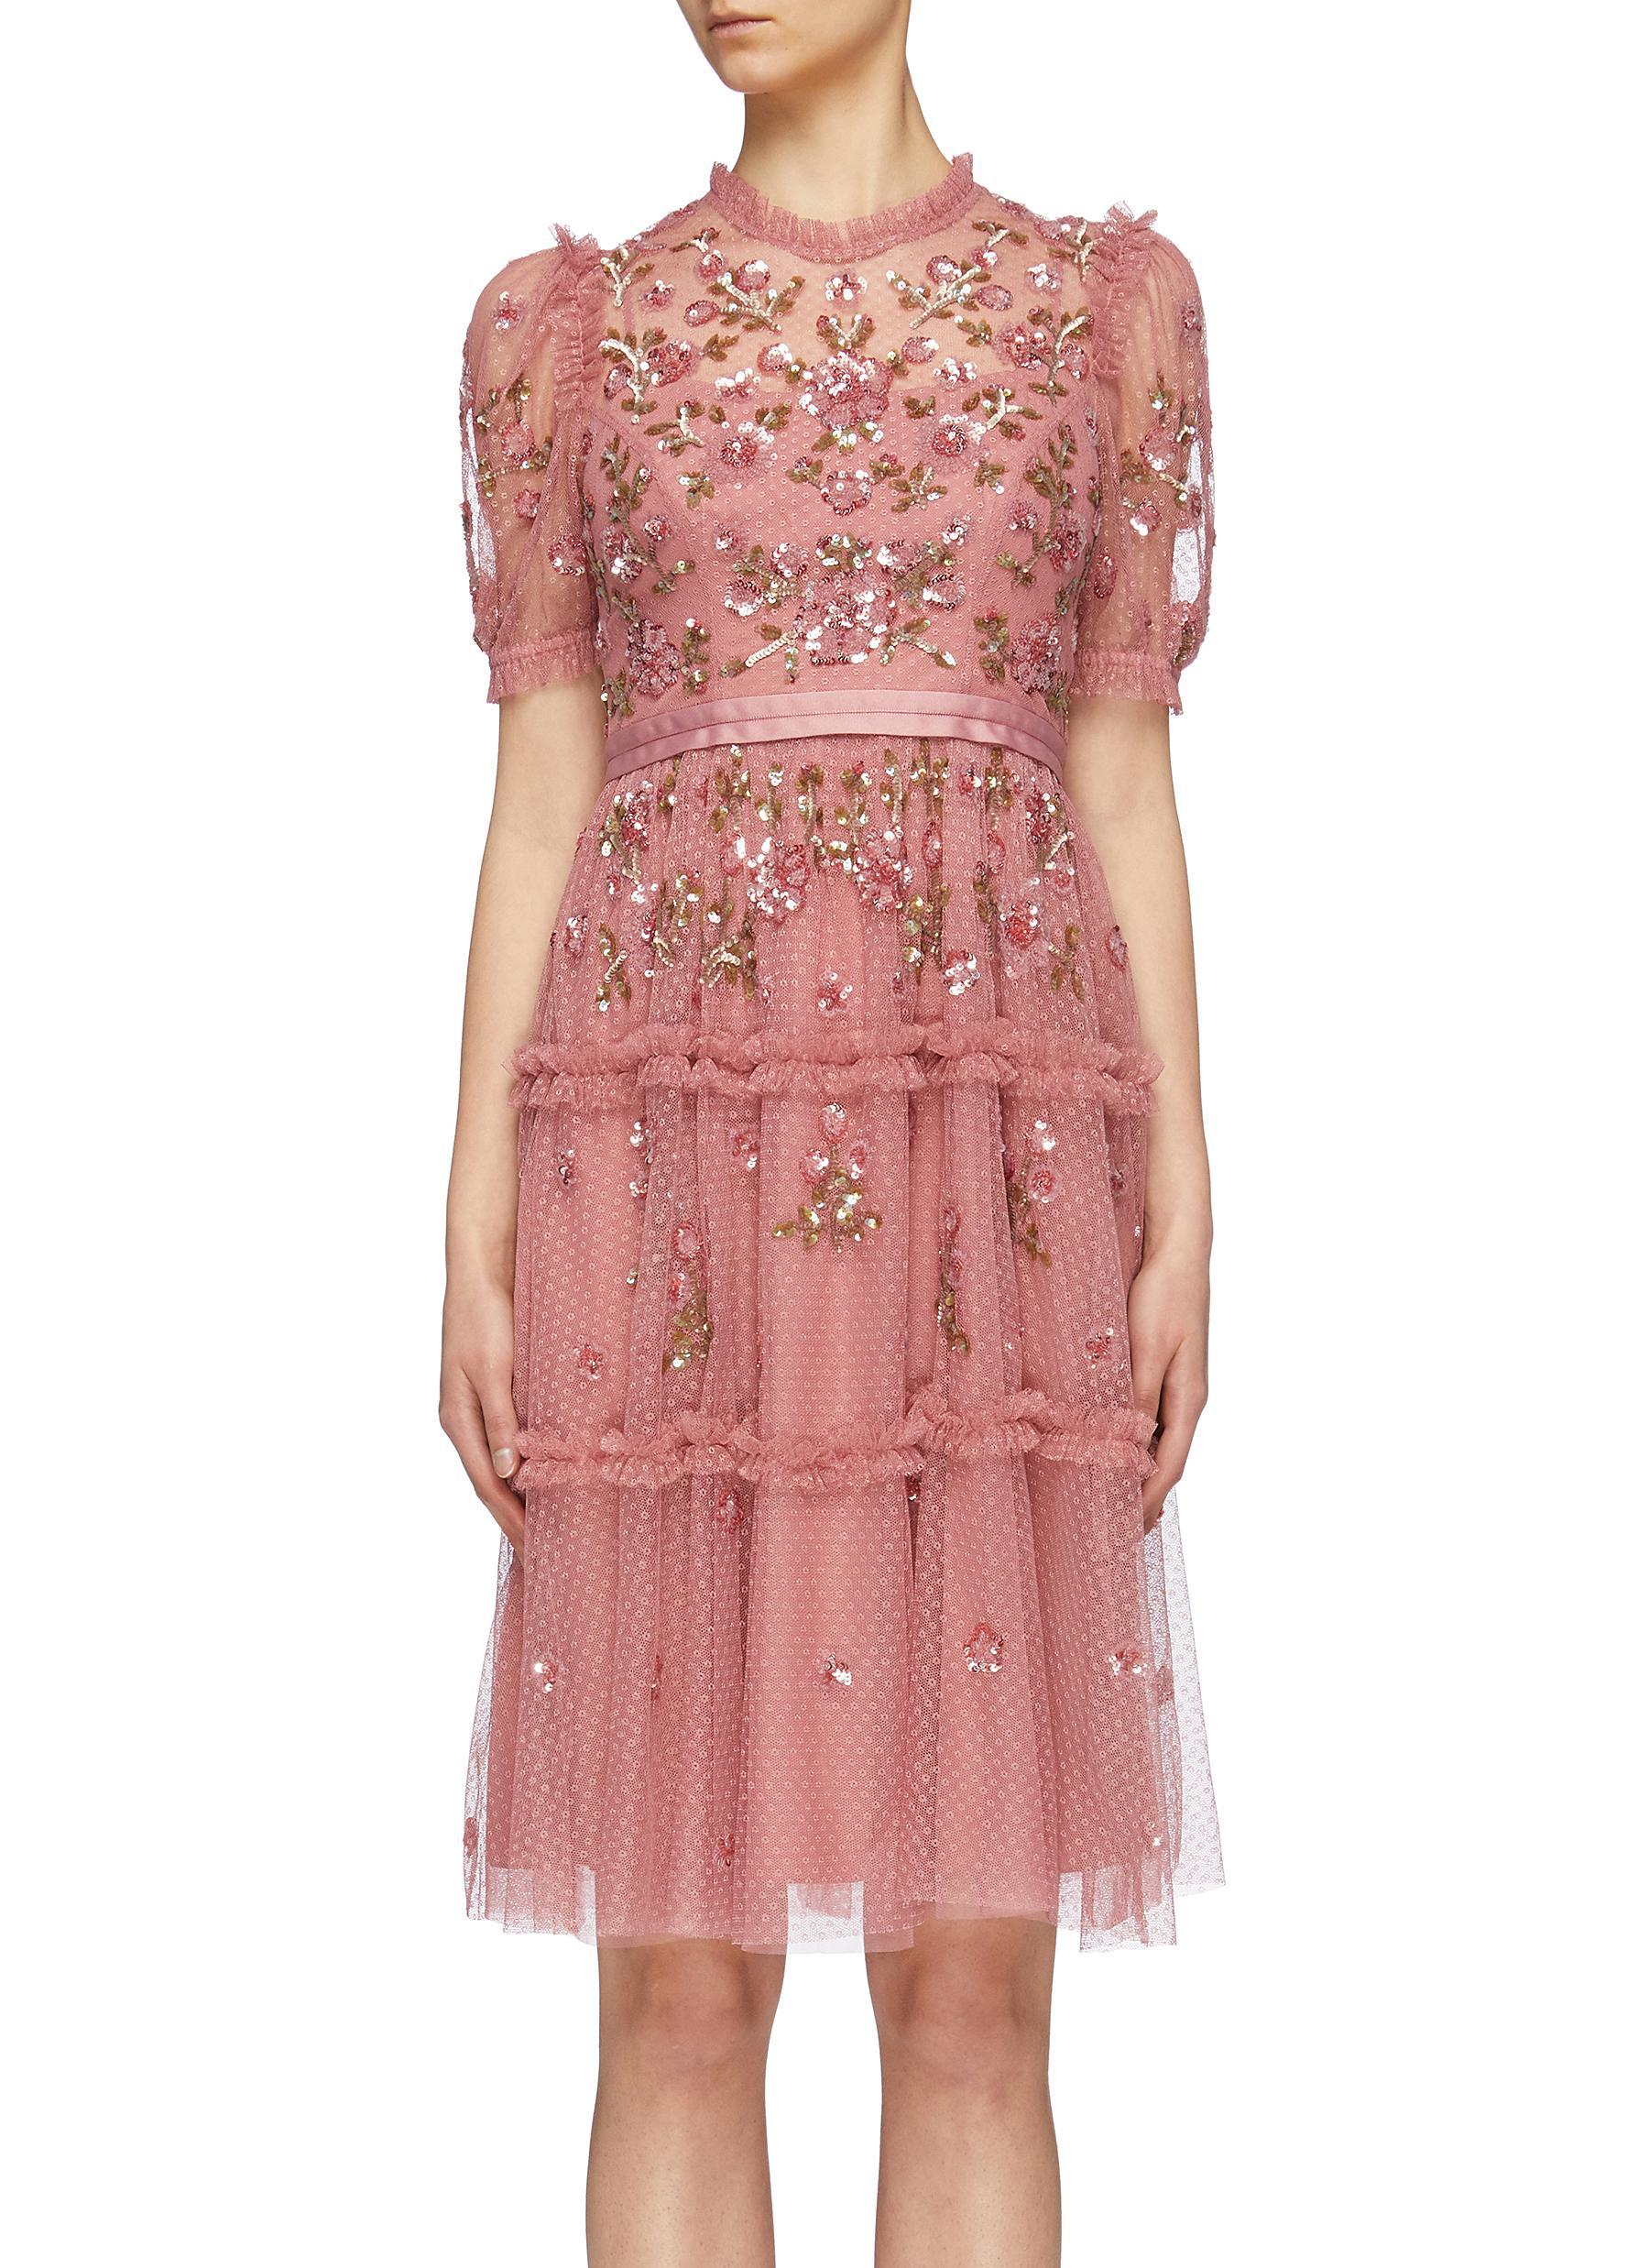 needle and thread pink dress